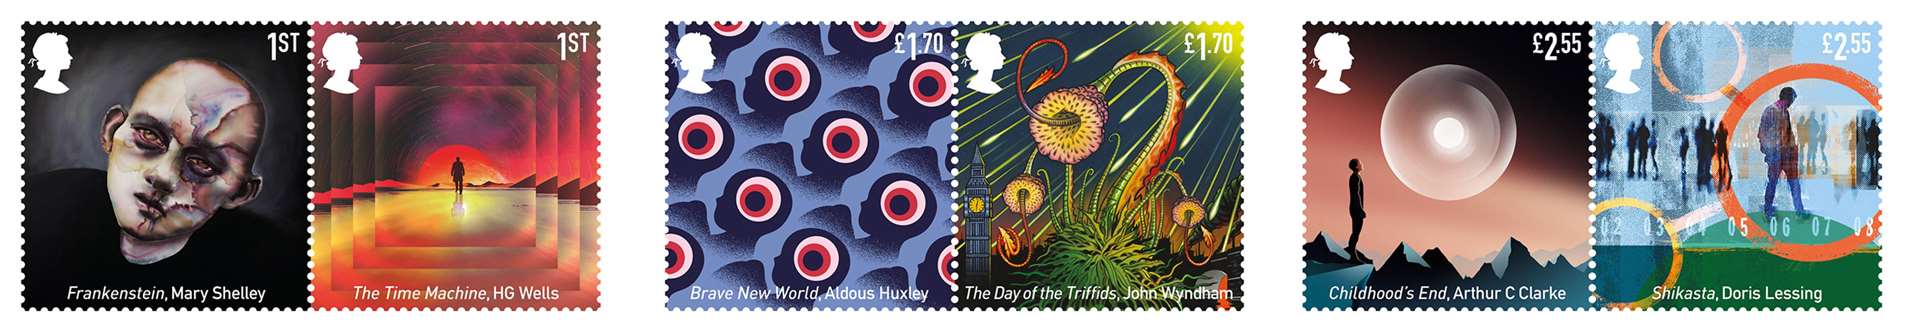 Classic sci-fi stamps (Royal Mail/PA)